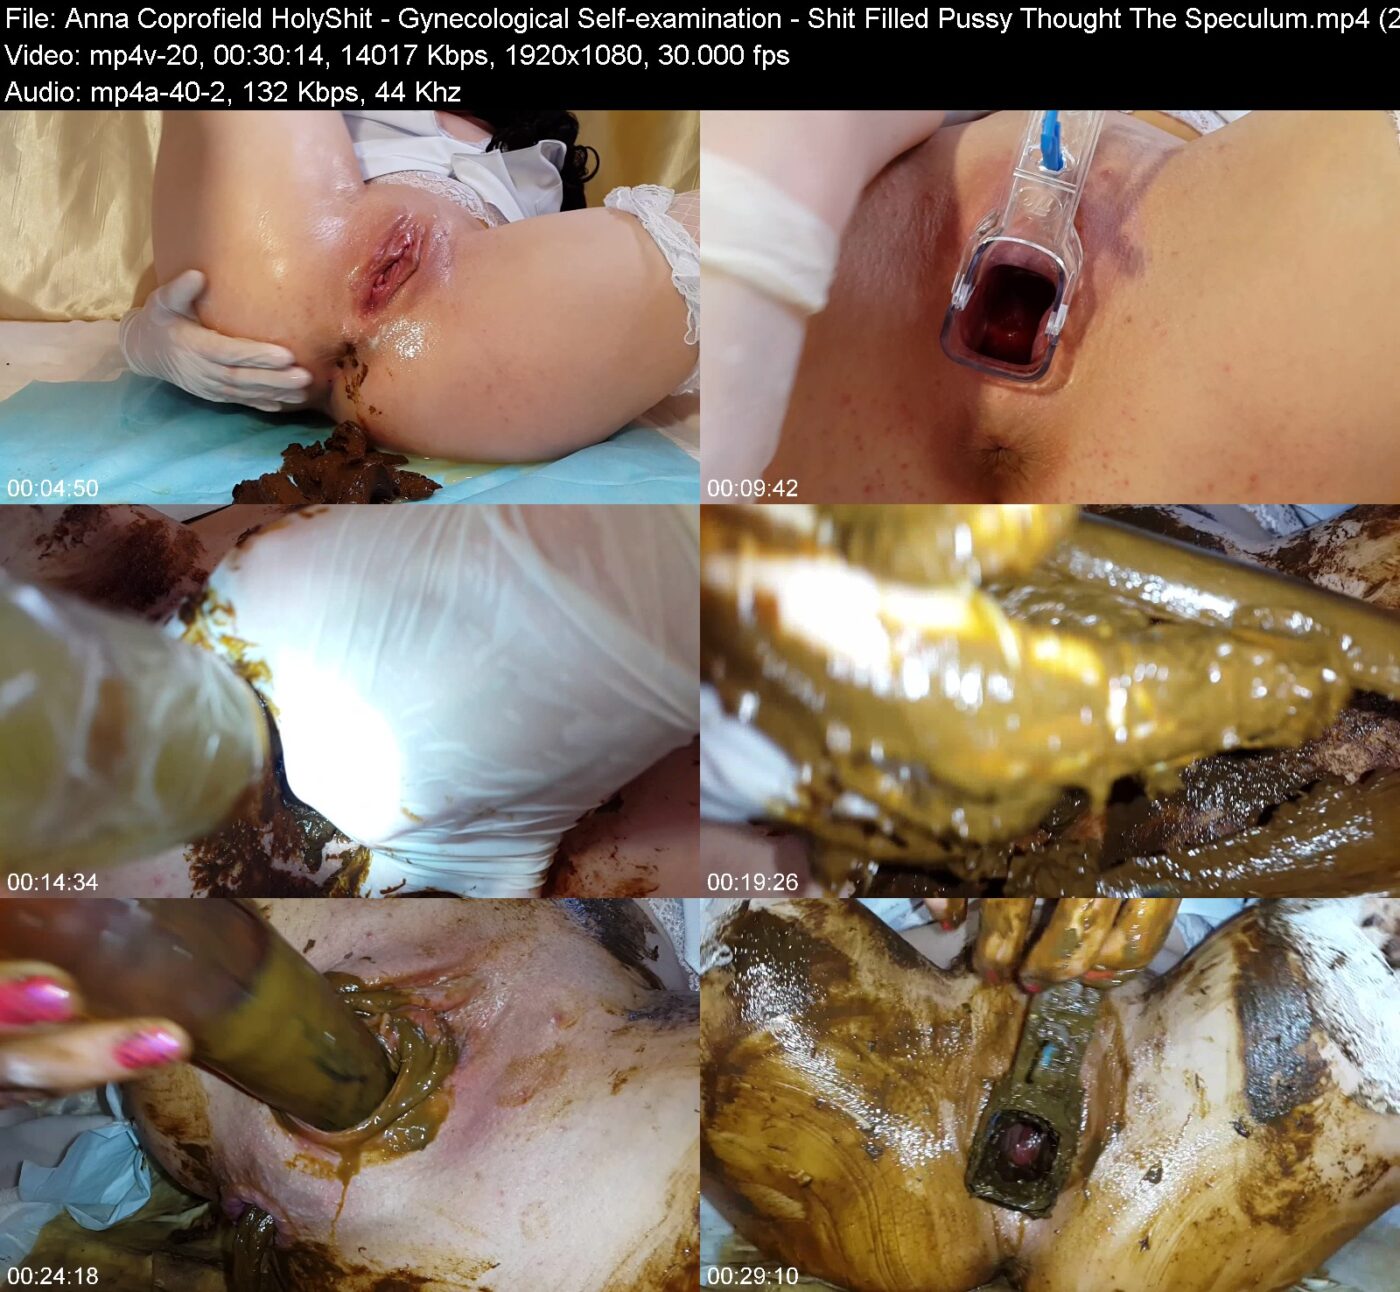 Anna Coprofield HolyShit in Gynecological Self-examination in Shit Filled Pussy Thought The Speculum